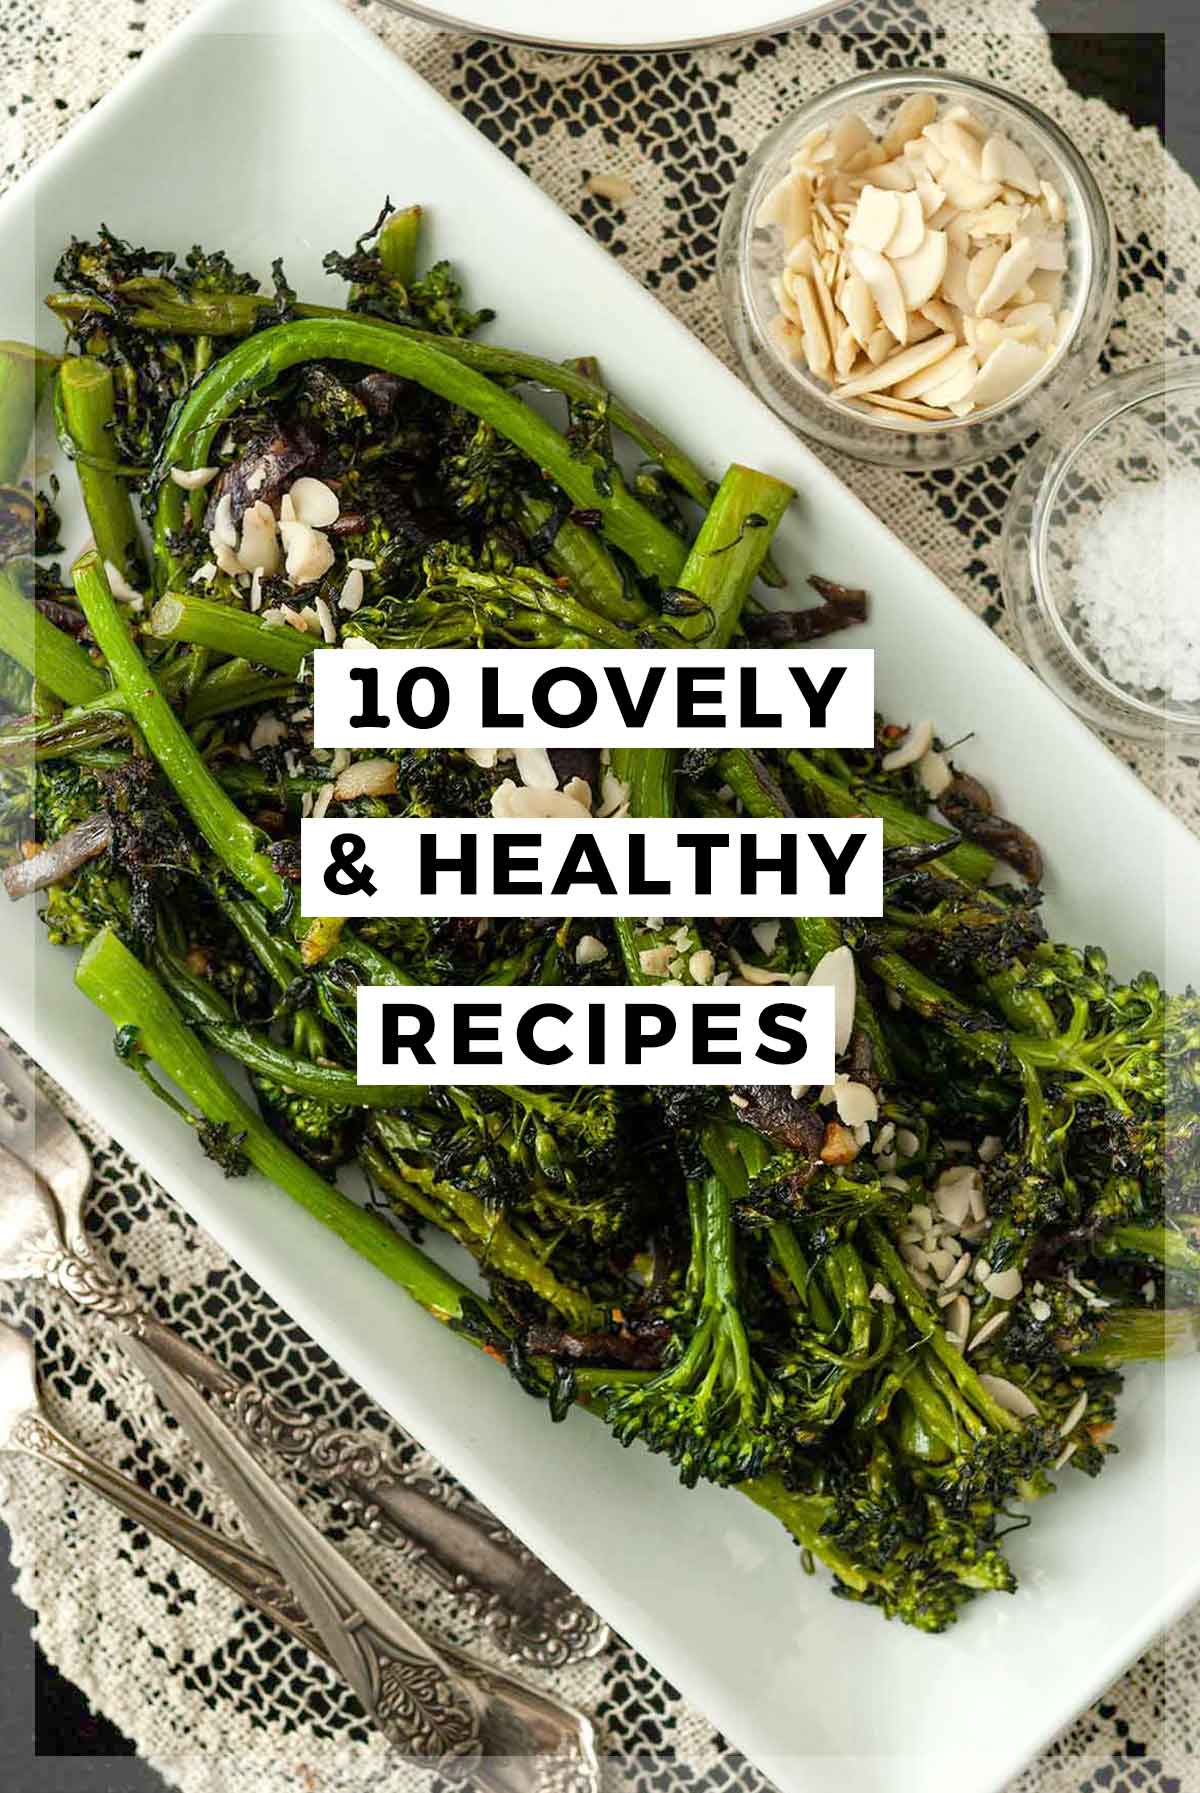 Sautéed broccoli rabe on a plate with a title that says "10 Lovely and Healthy Recipes."